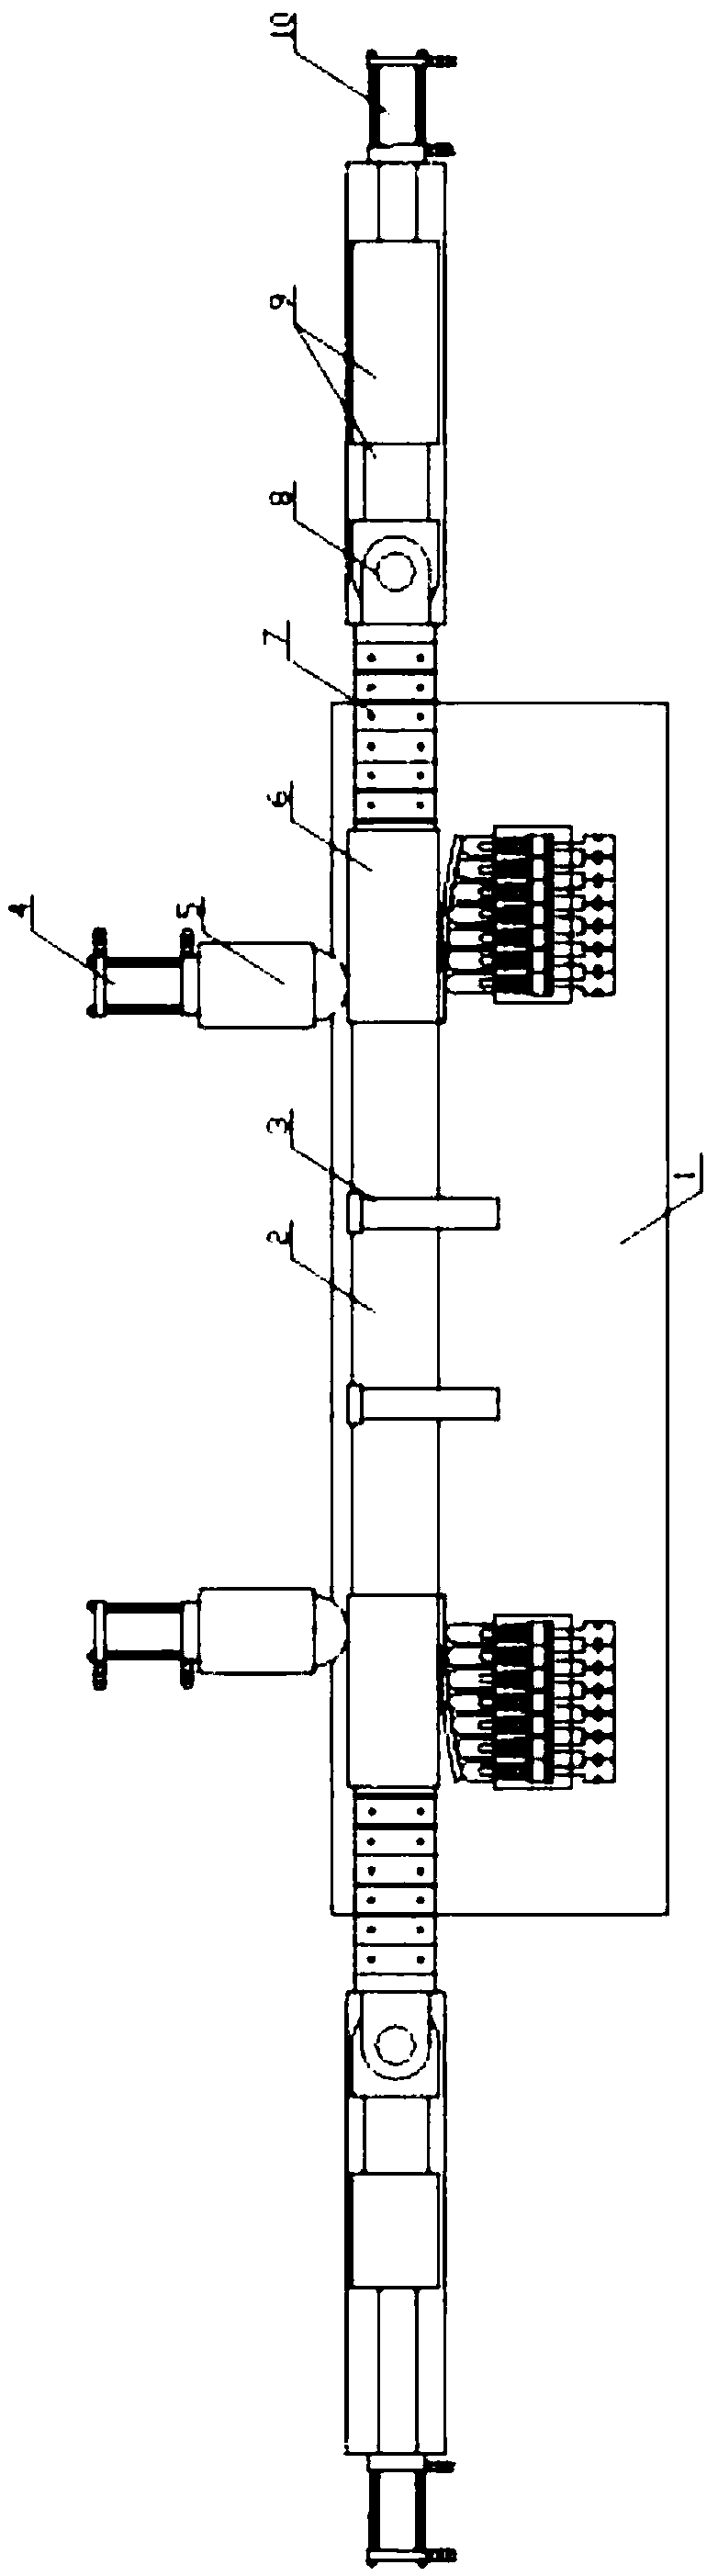 Ultrasonic-assisted vibration multi-point mold support rotary forming device